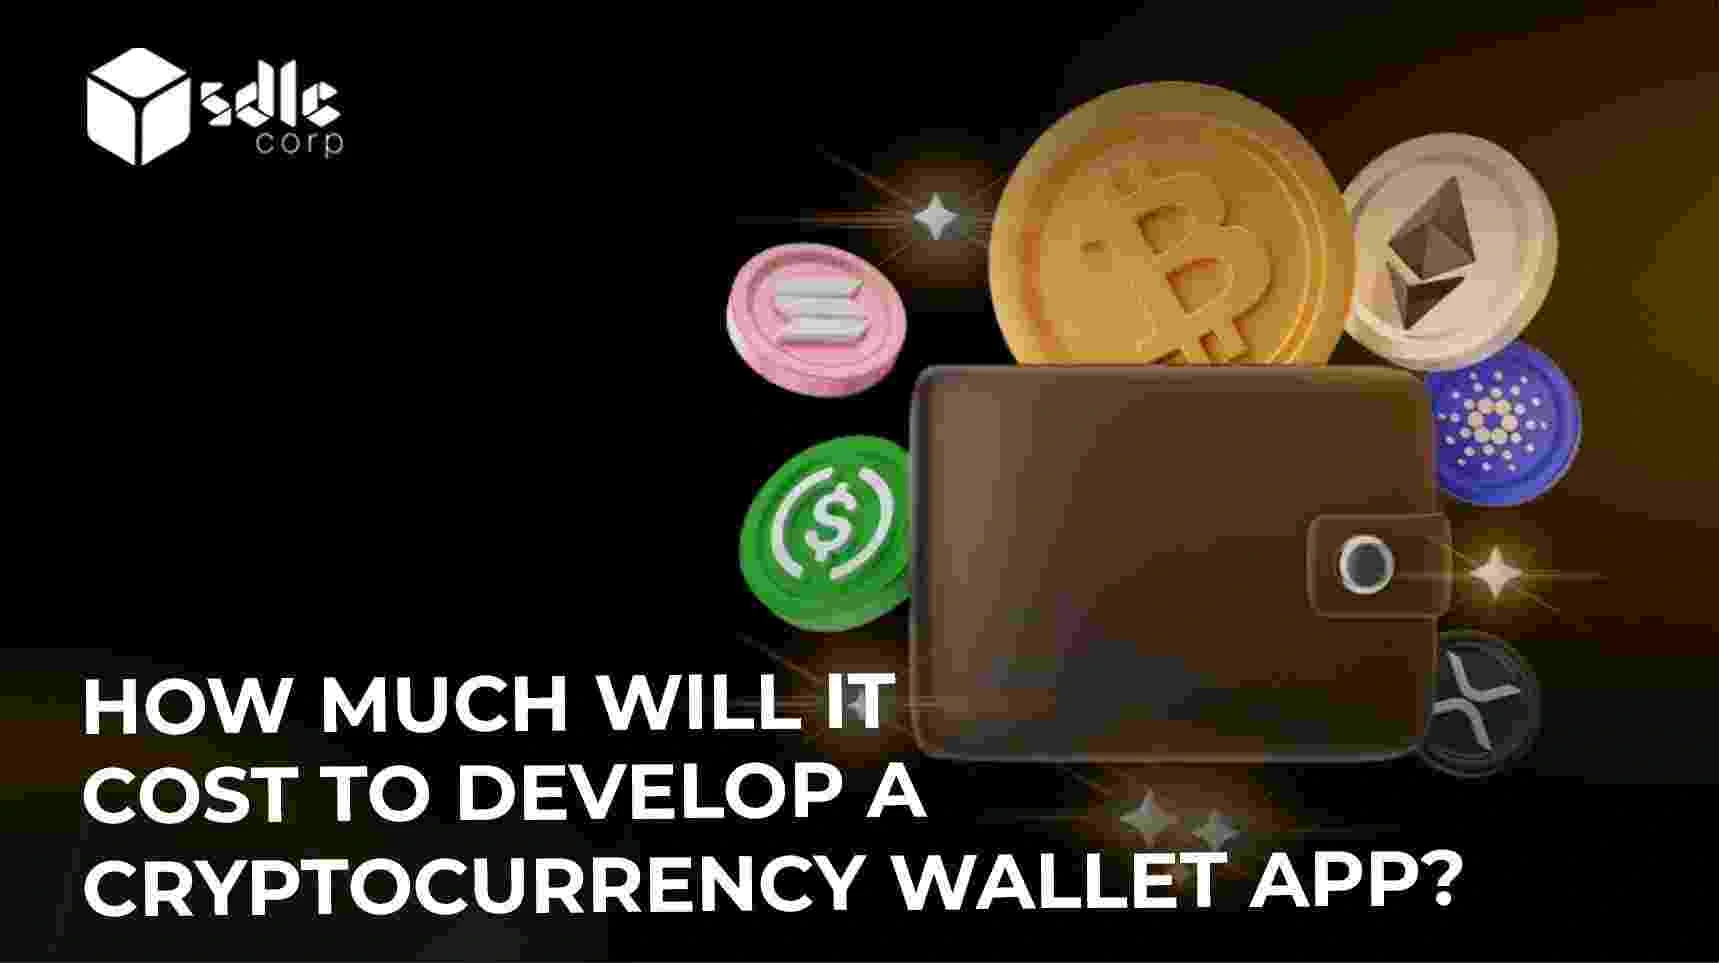 How Much Will It Cost To Develop a Cryptocurrency Wallet App